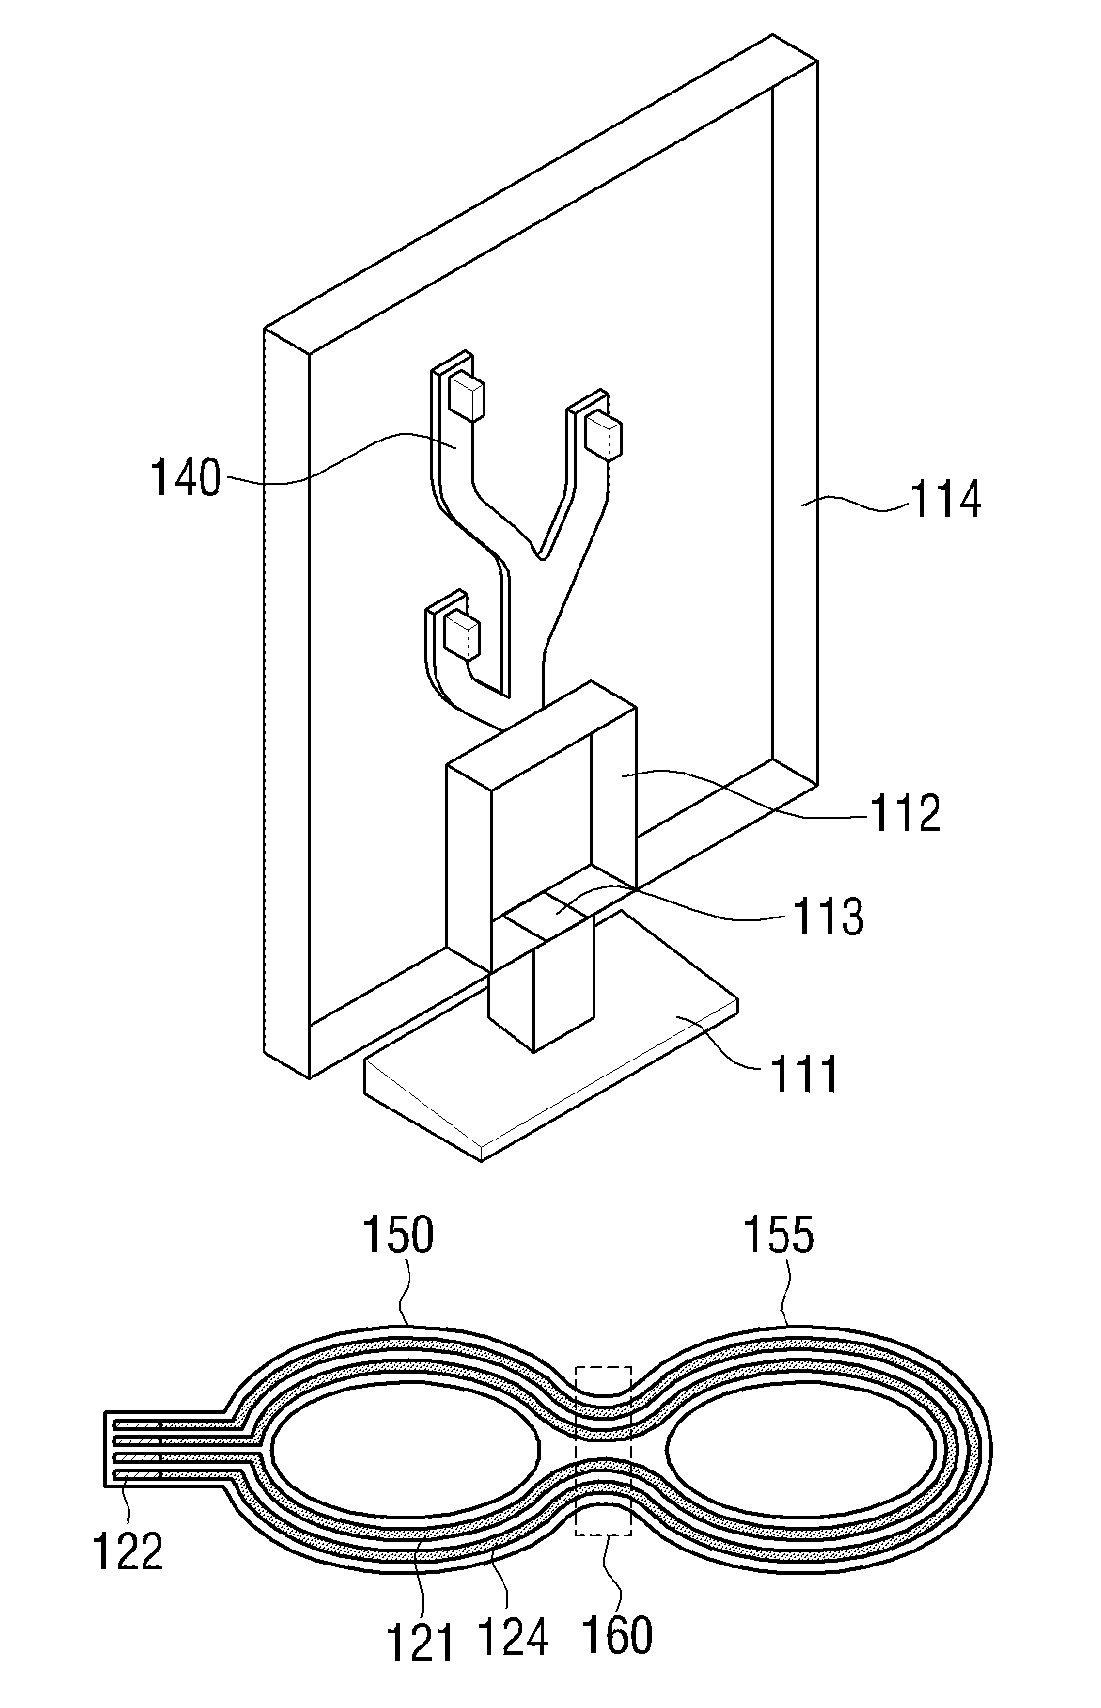 Three-dimensional glasses and system for wireless power transmission